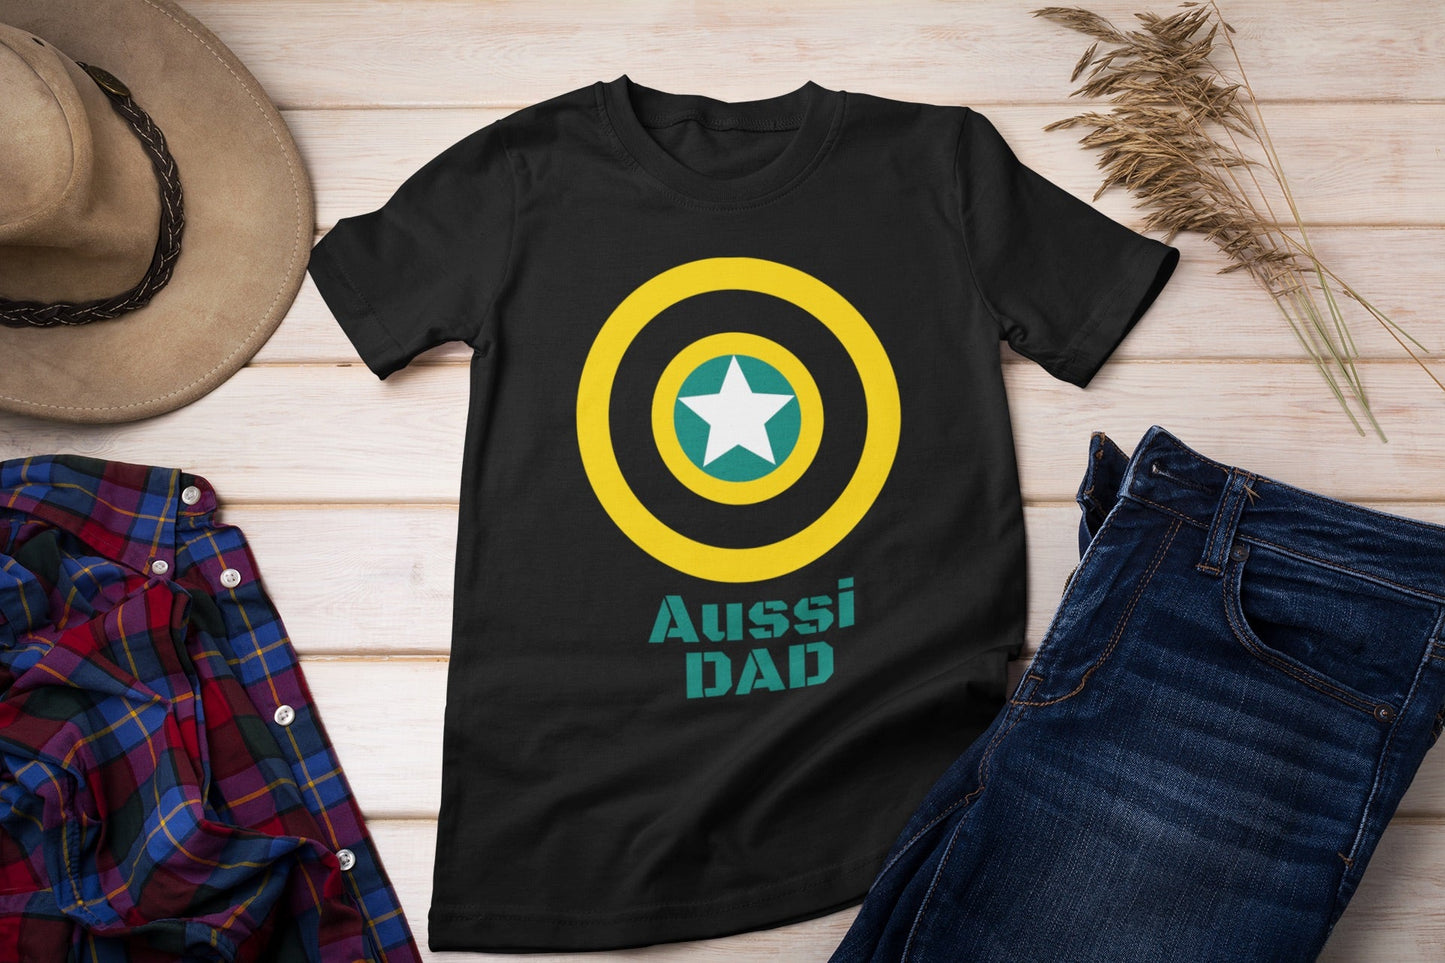 Aussie Dad T-shirt | Father's Day Gift - Three2Tango Tee's